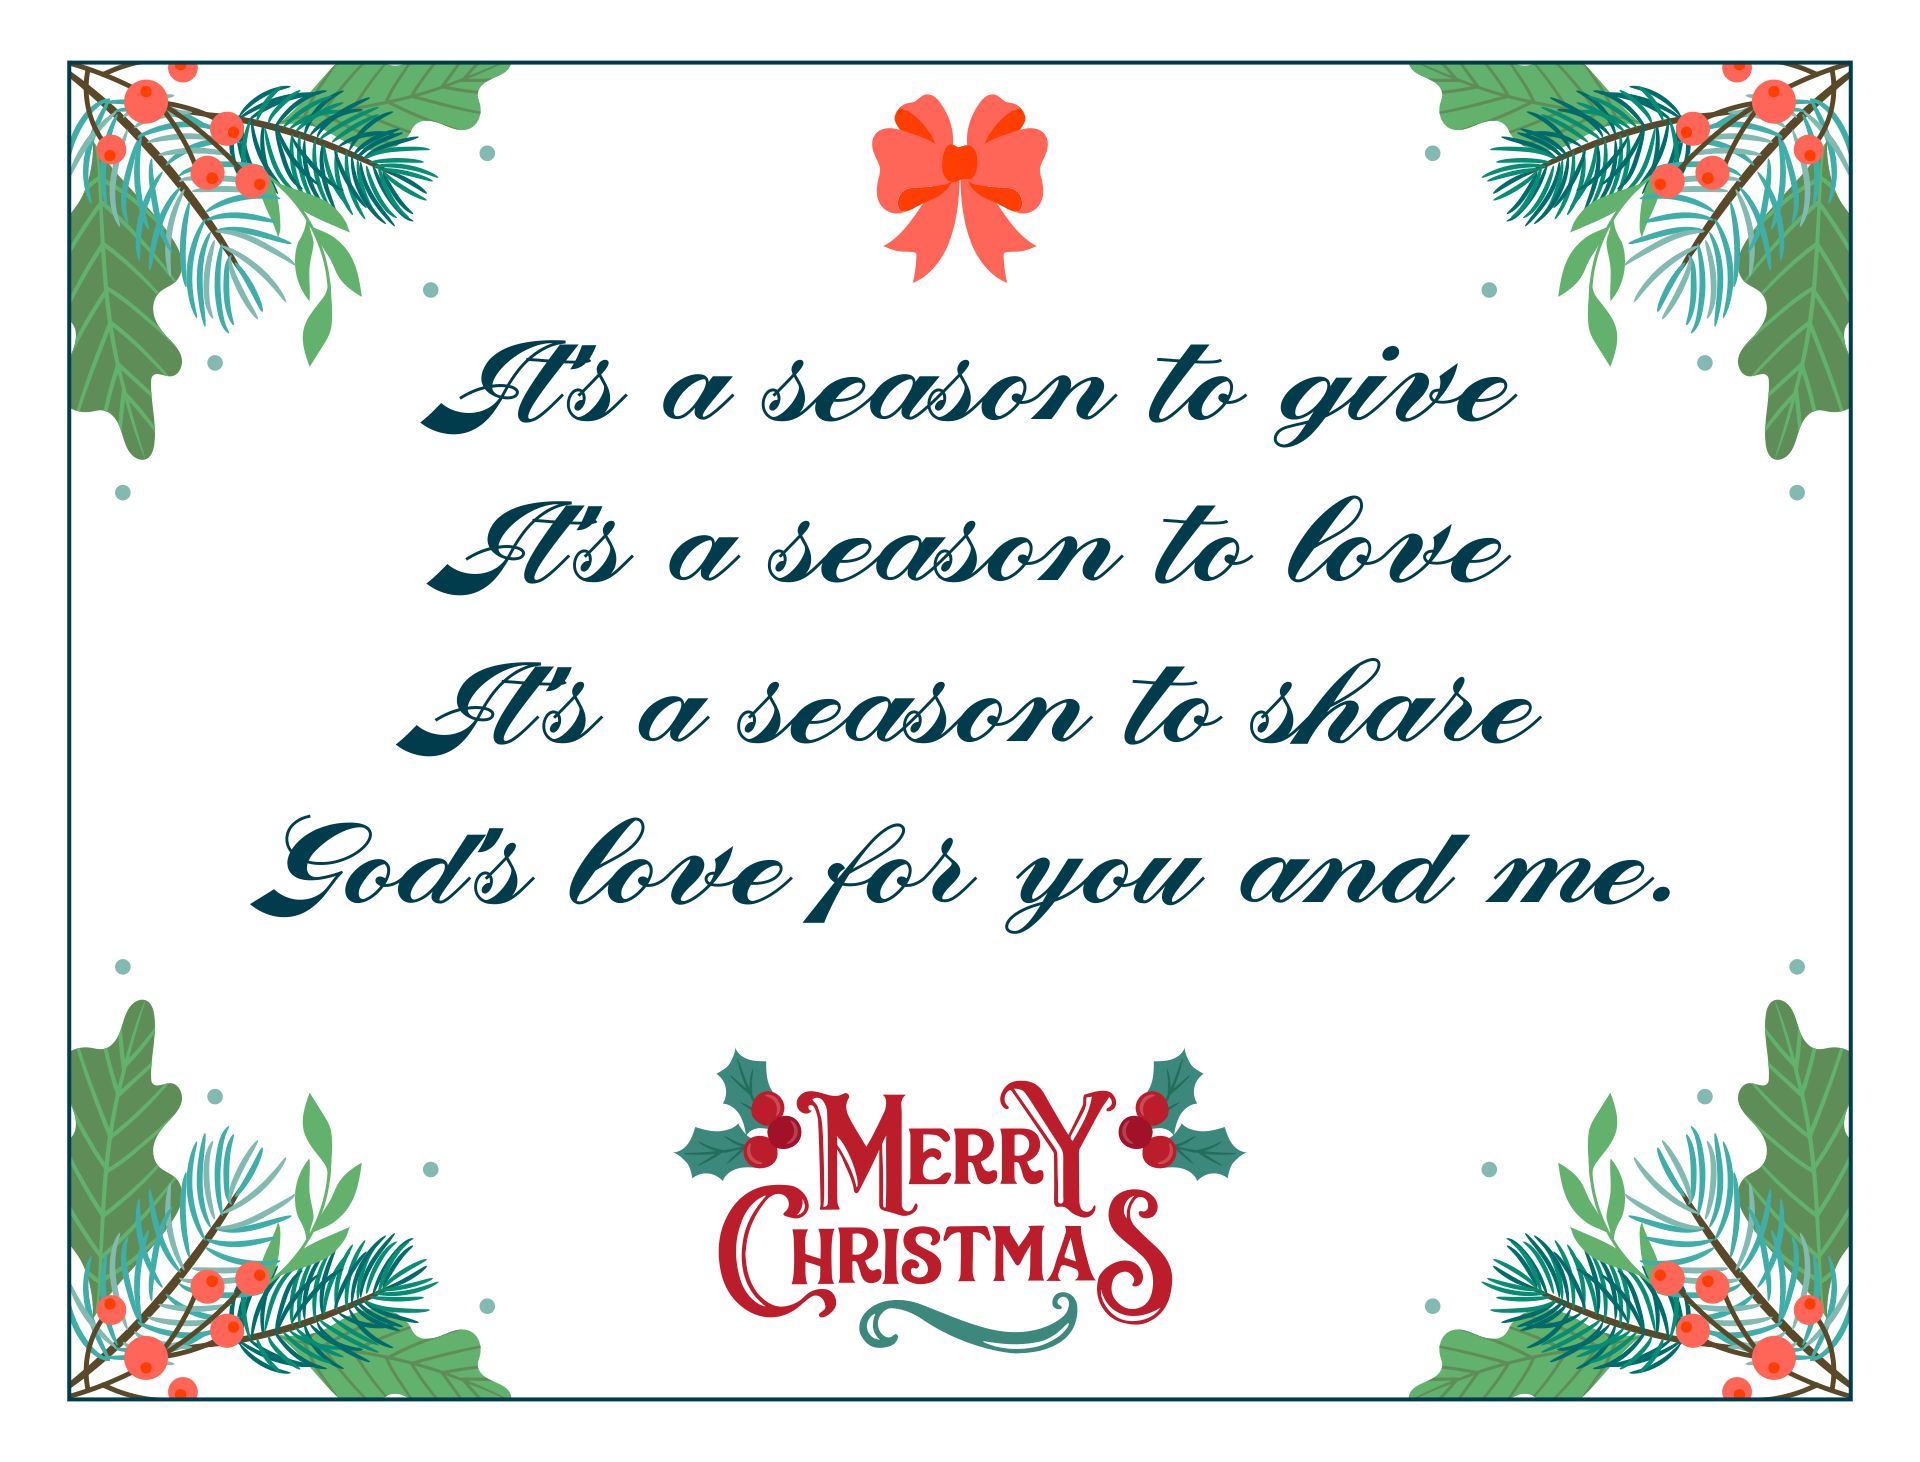 Christian Christmas Cards With Messages And Wishes